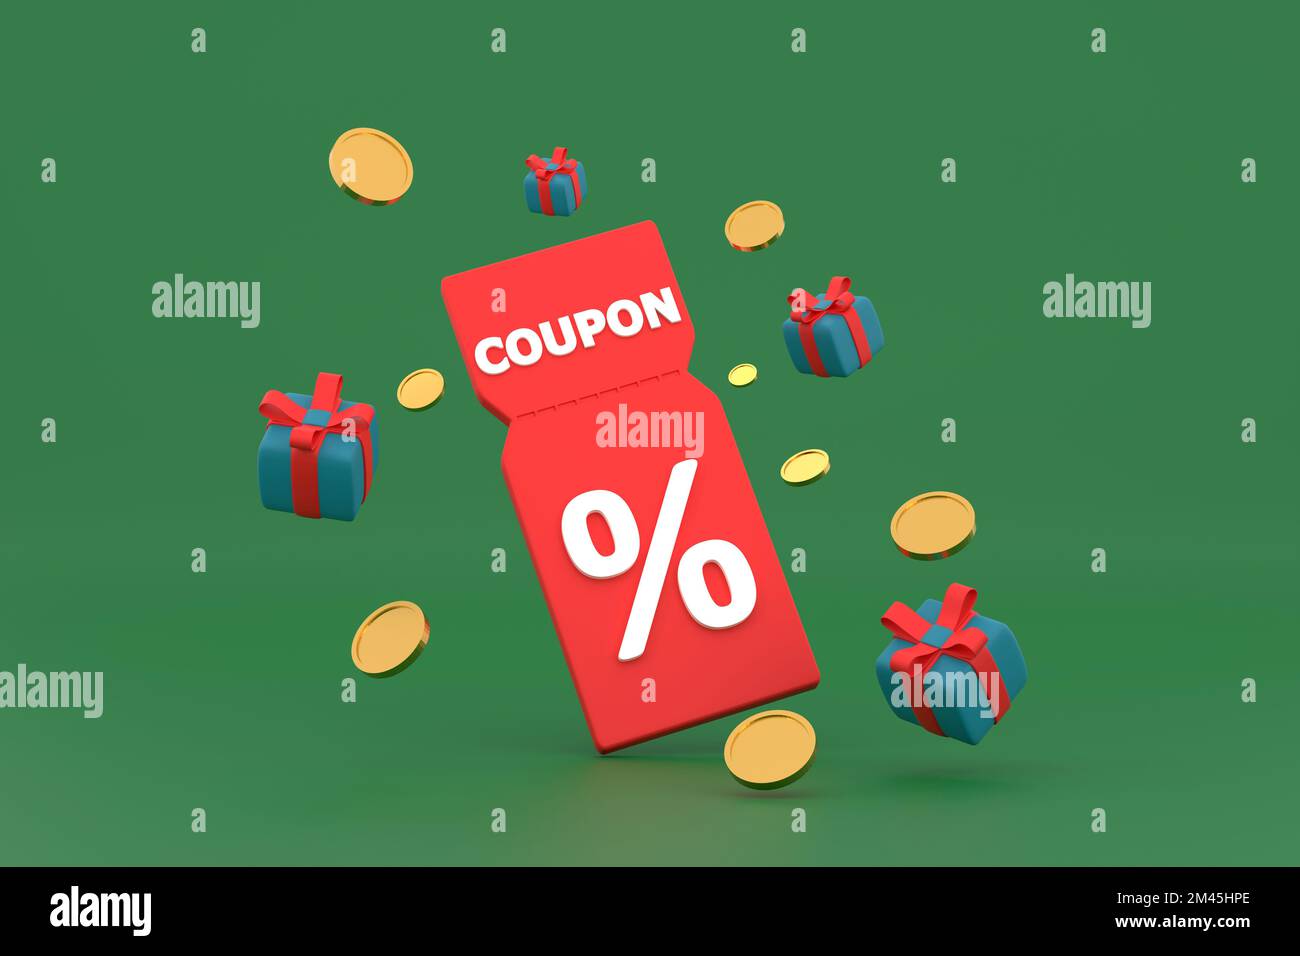 3D. discount coupon with percentage sign with coins and gift box. Voucher card cash back. Stock Photo